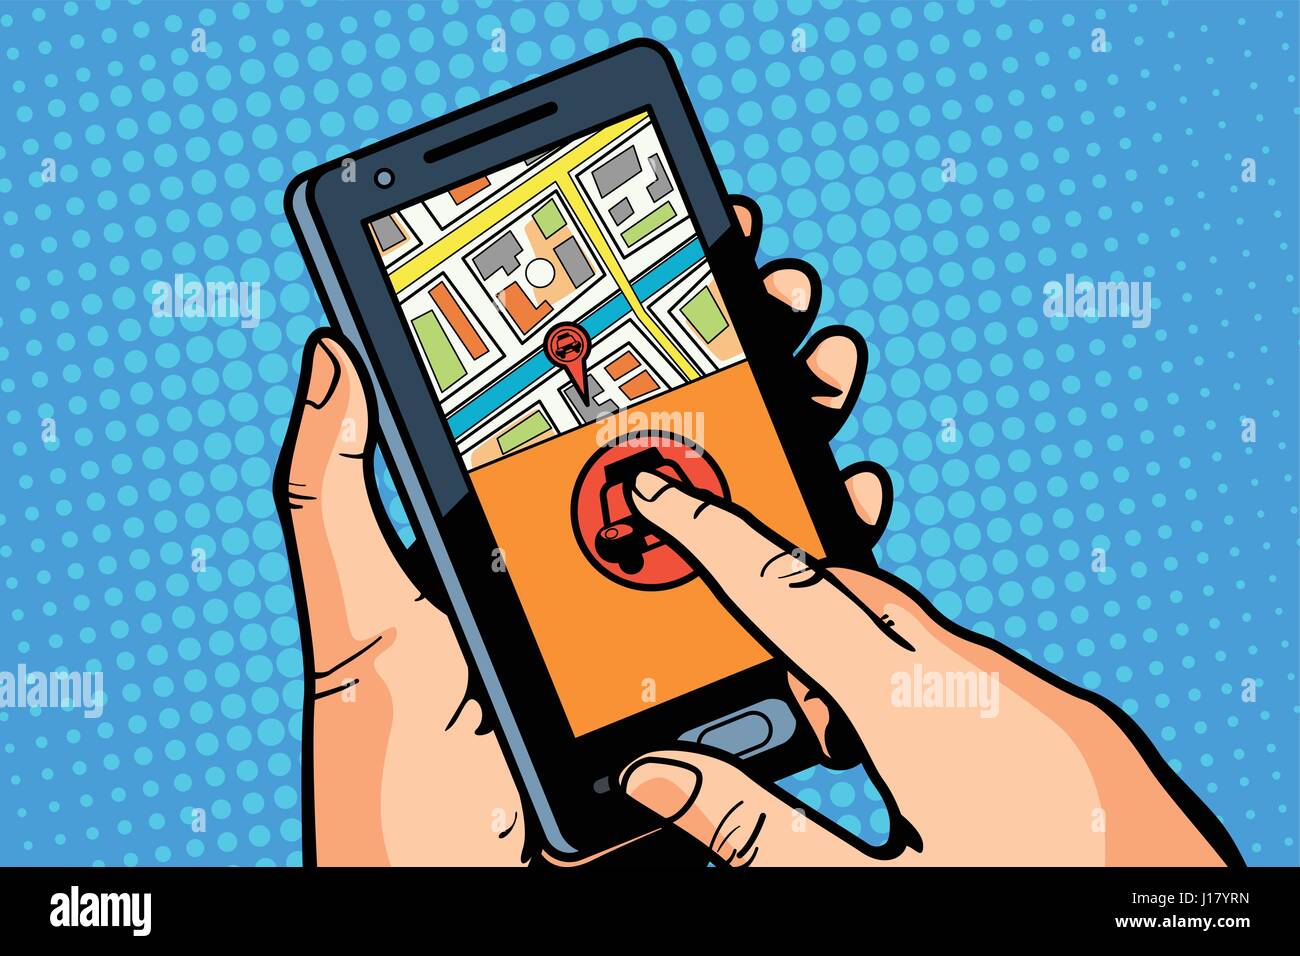 A vector illustration of Display of Phone App for Calling a Ride Stock Vector